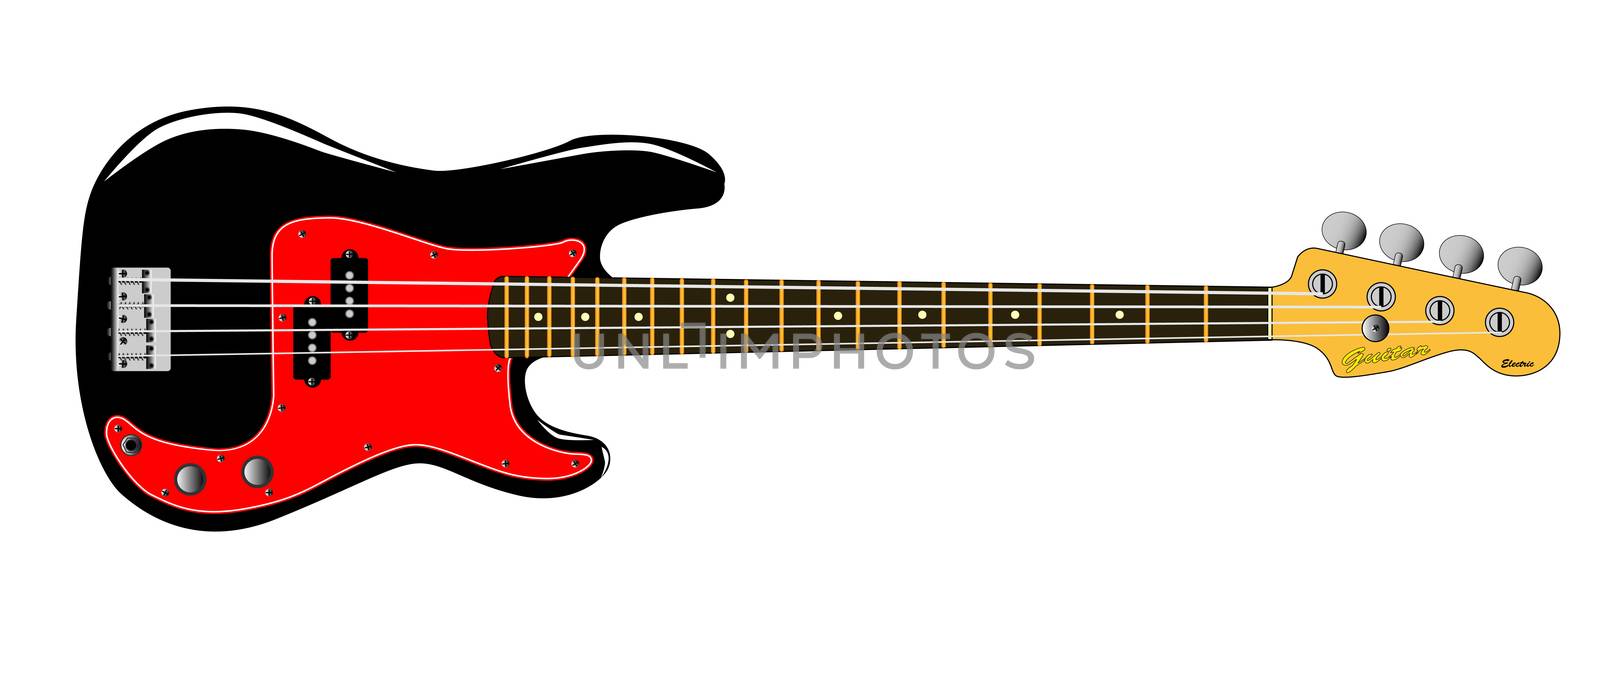 A generic bass guitar isolated over a white background.